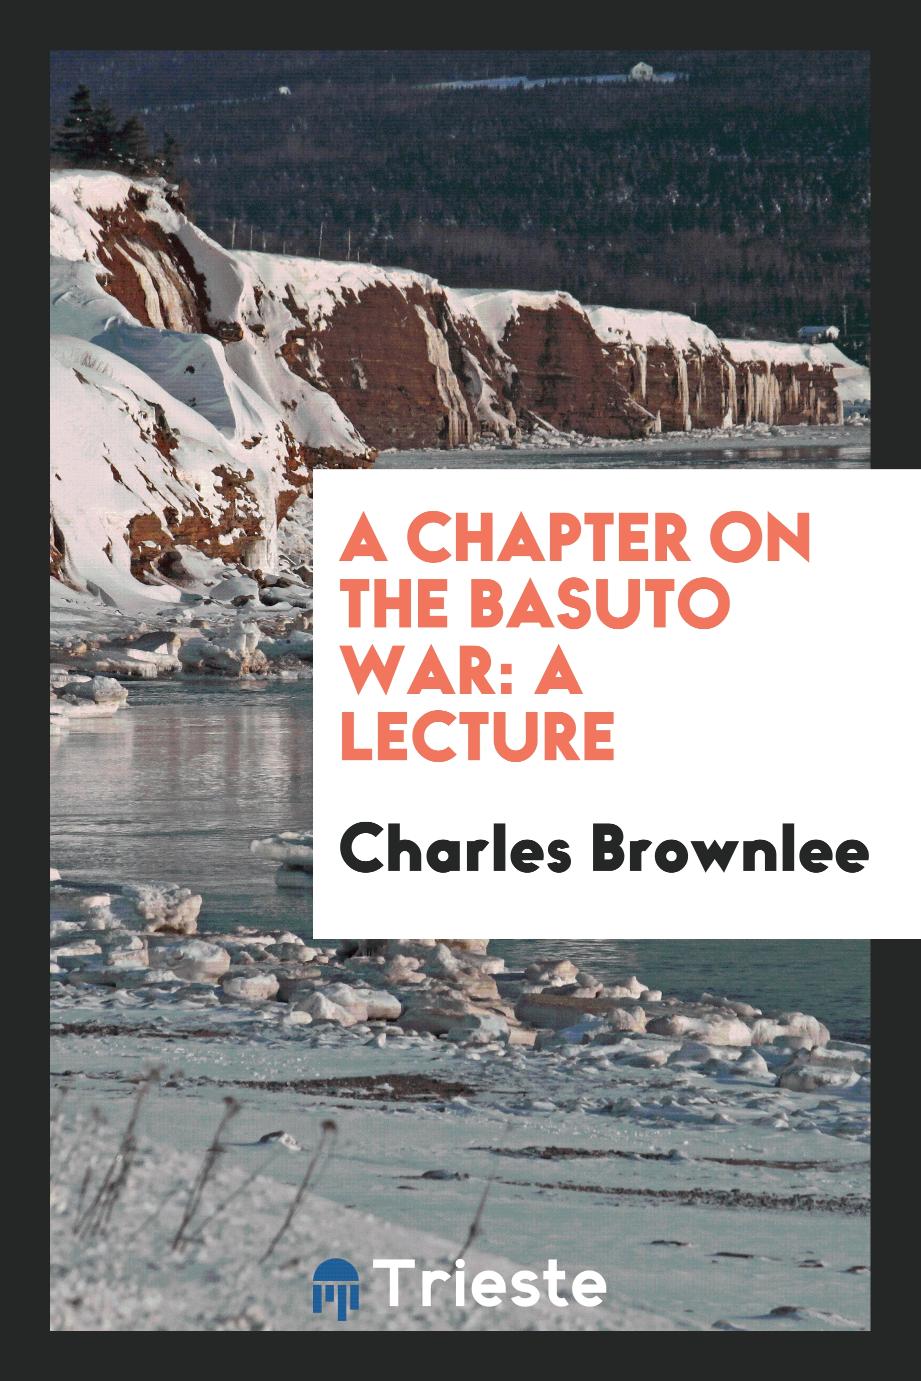 A Chapter on the Basuto War: A Lecture